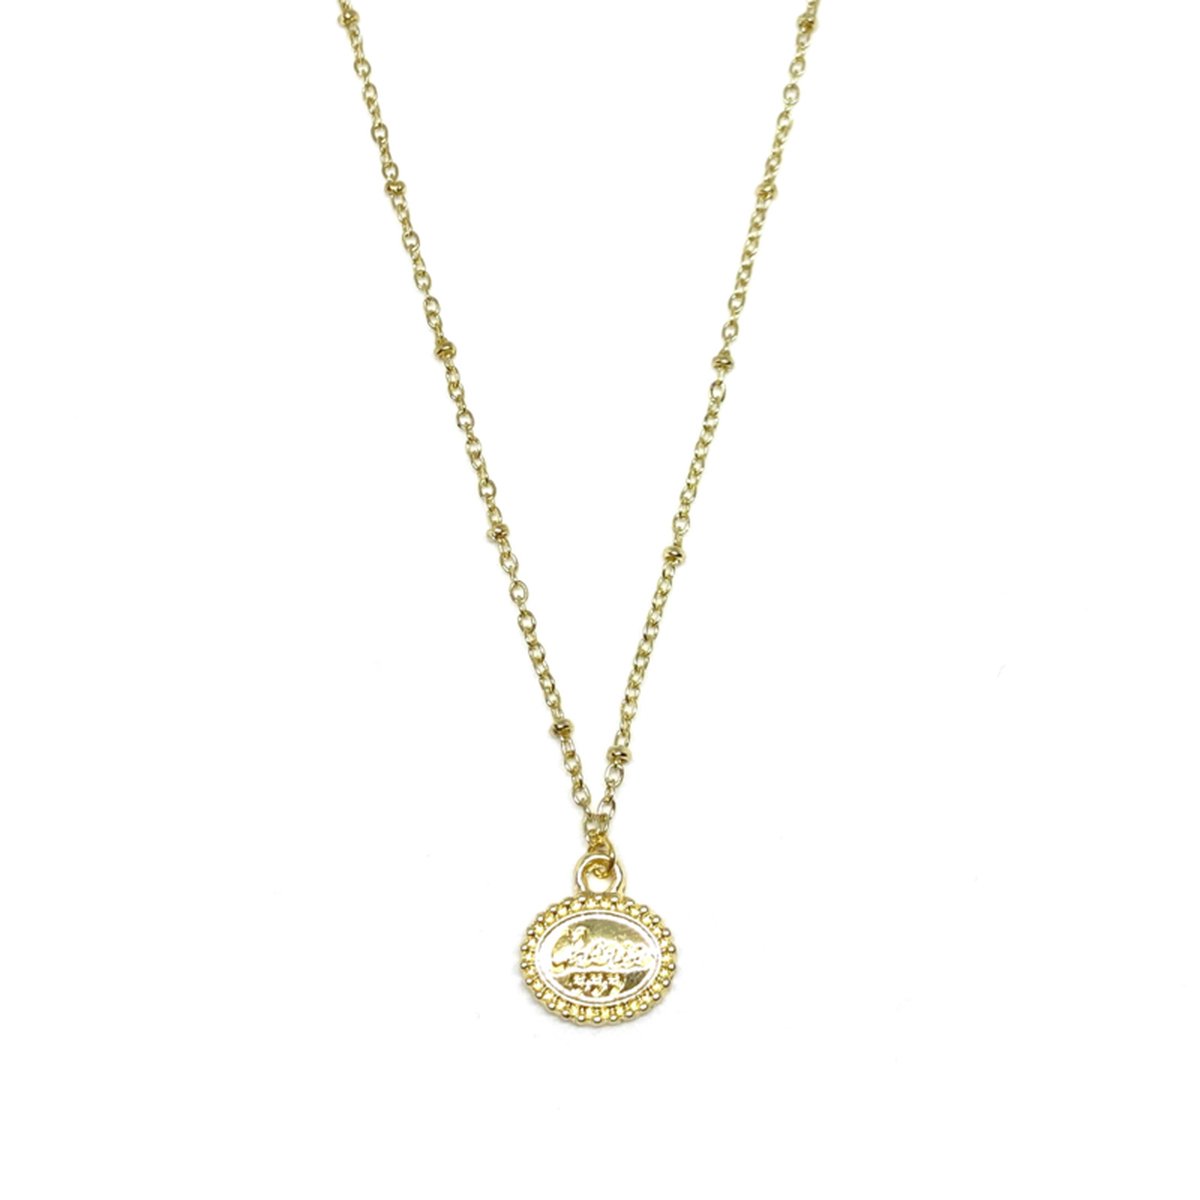 Cherie necklace - gold